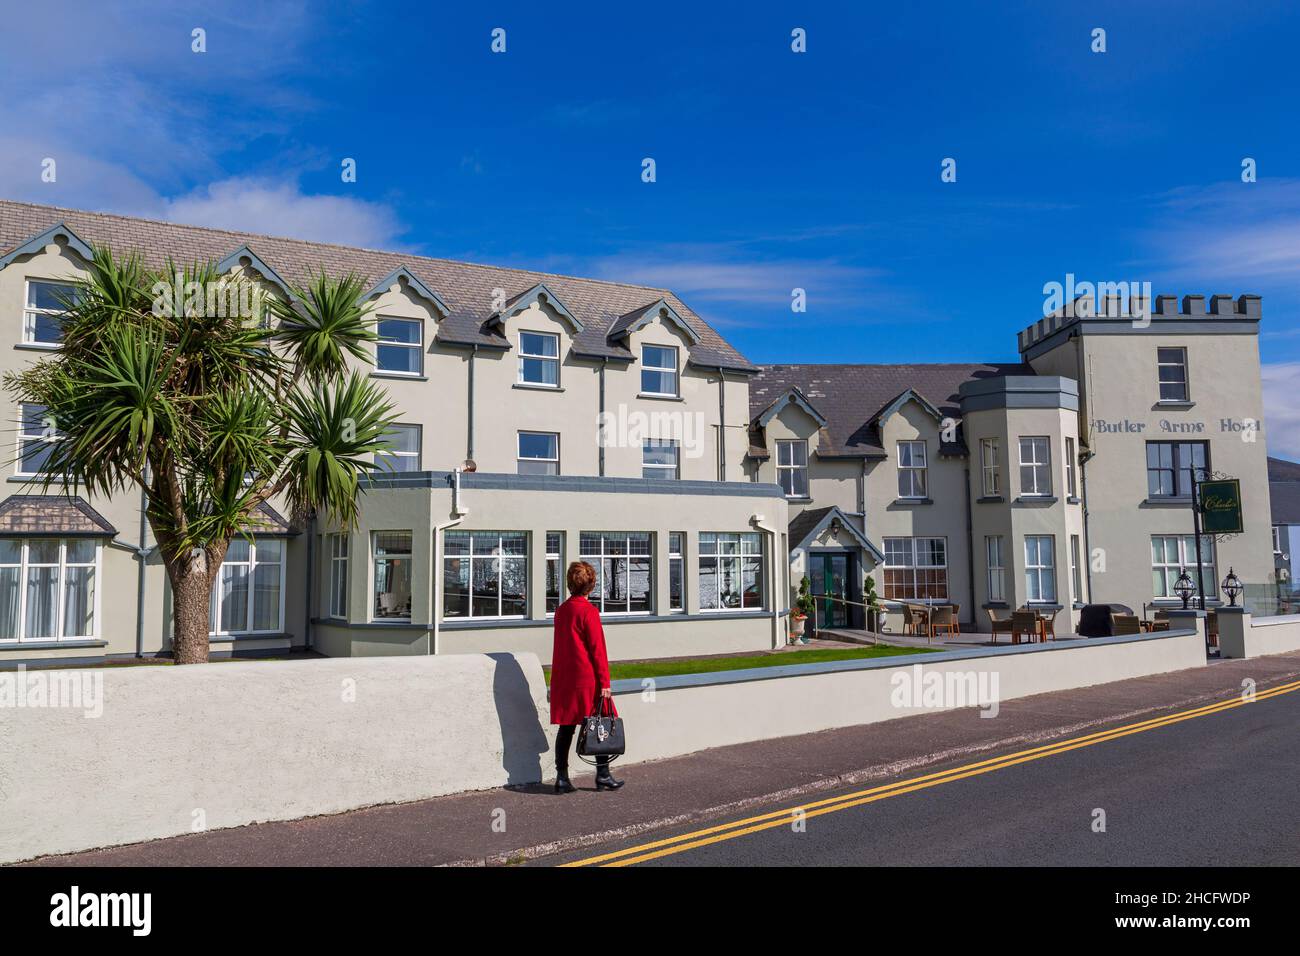 Butler Arms Hotel, Waterville Town, County Kerry, Irlanda Foto Stock